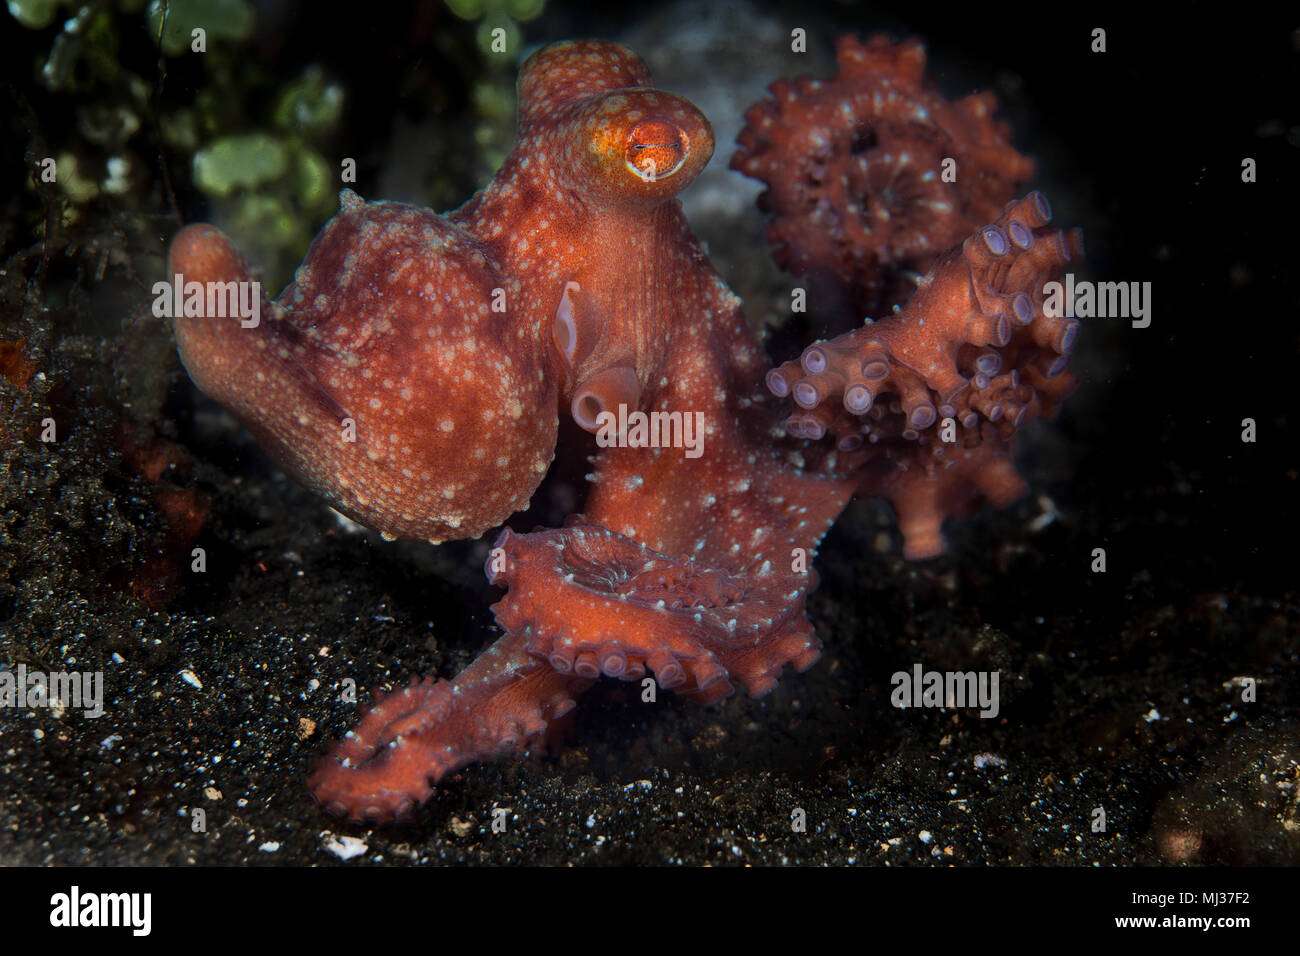 A Starry Night octopus crawls across the black sand seafloor of Lembeh Strait, Indonesia, at night. This nocturnal cephalopod is relatively rare. Stock Photo